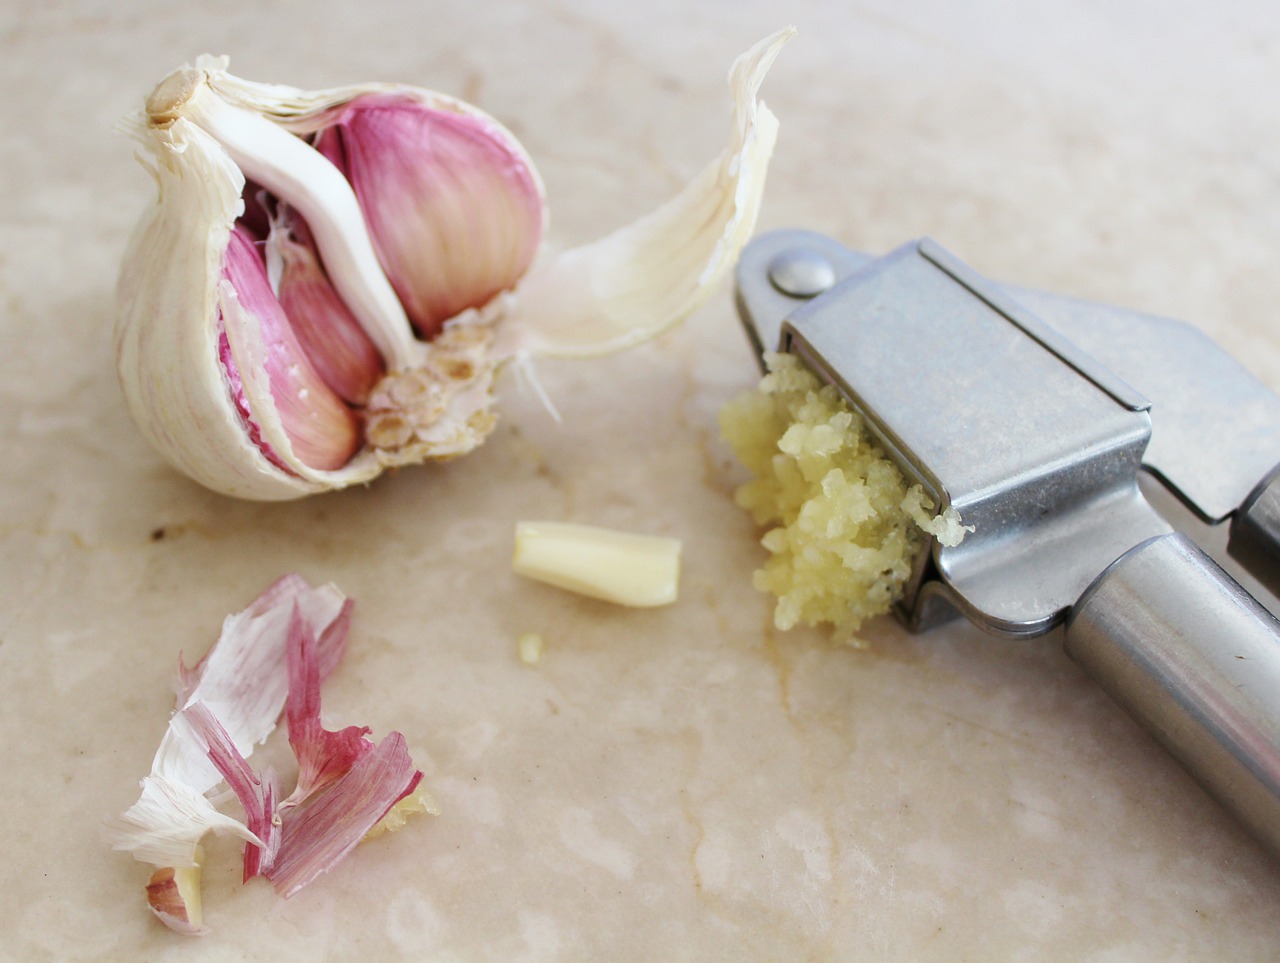 Tips for Healthy meals on a Budget - Garlic